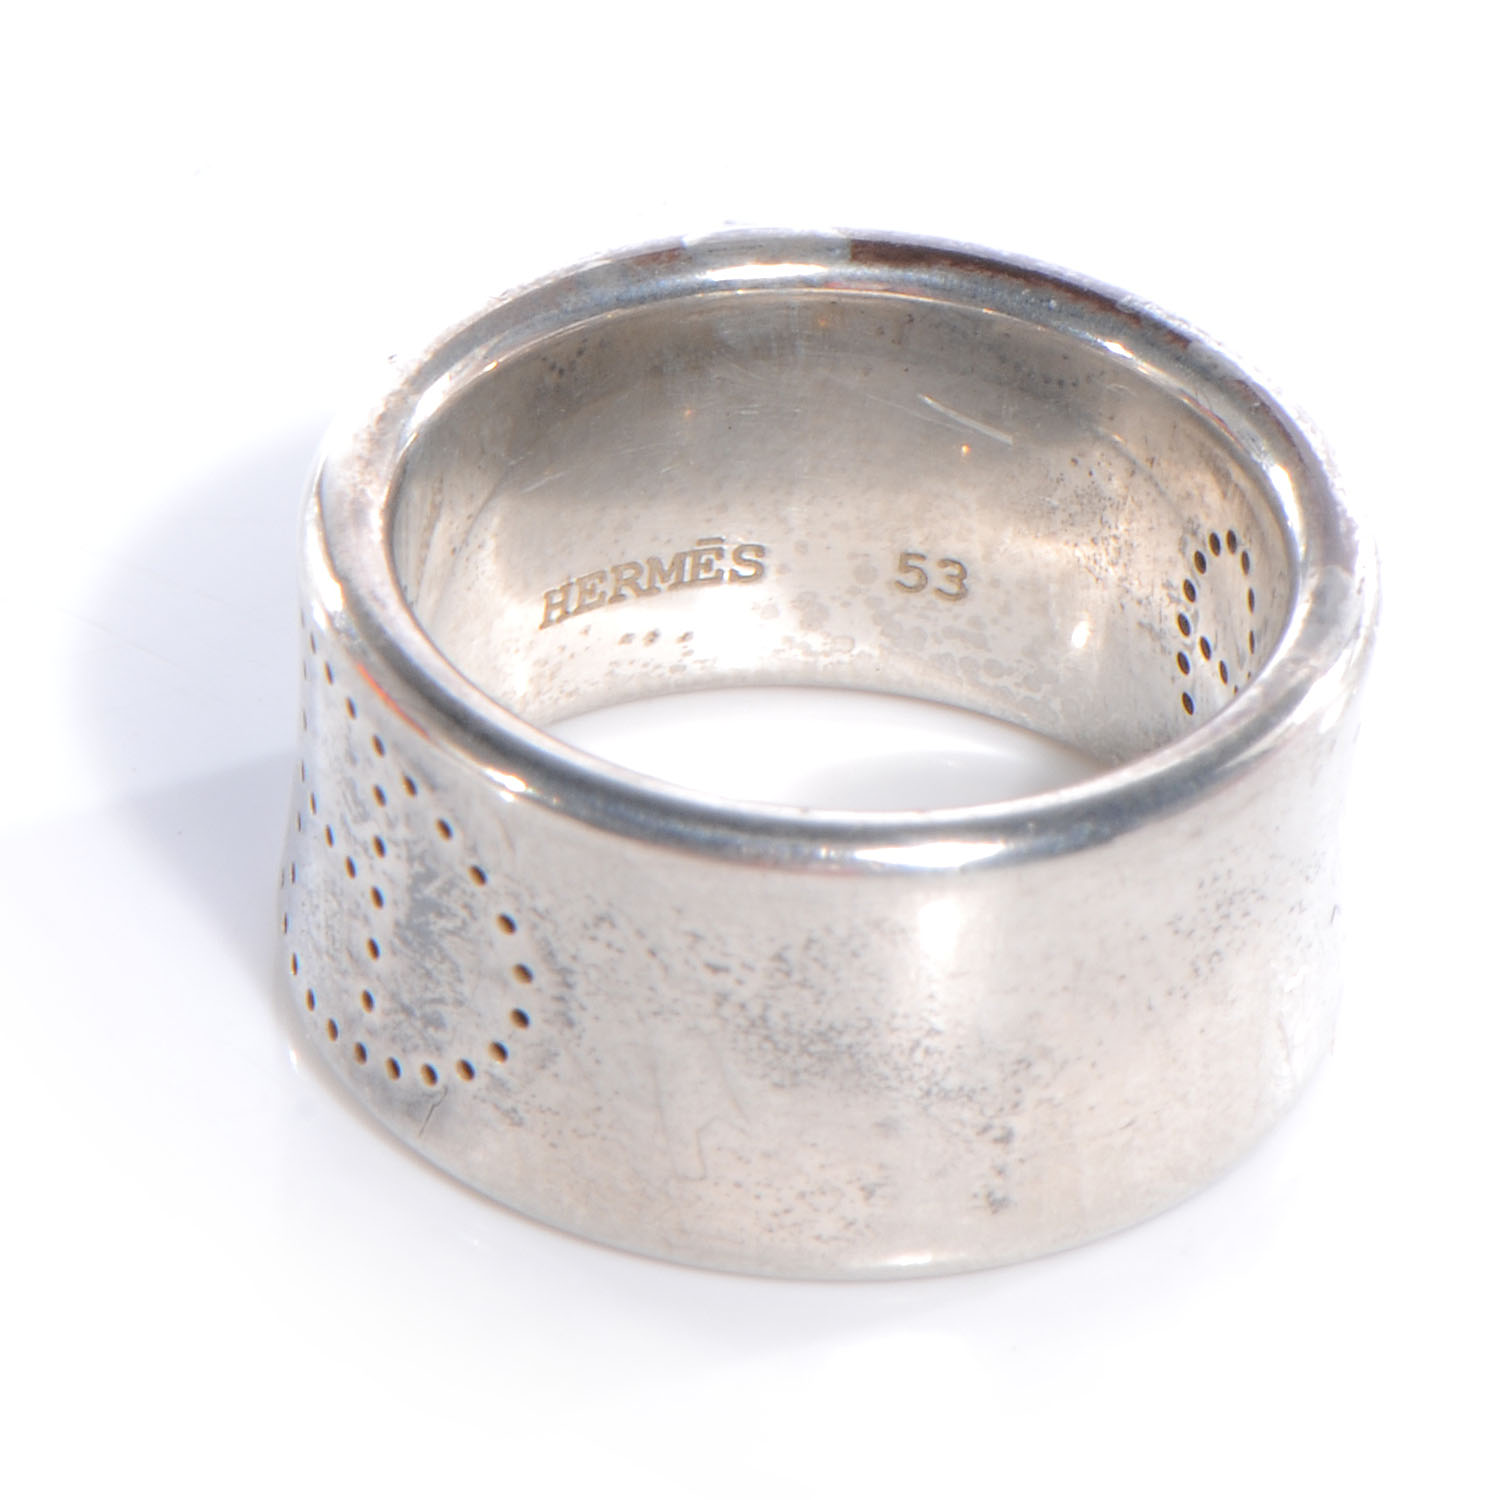 HERMES Sterling Silver Eclipse Ruban Ring GM 53 6 59442 | FASHIONPHILE